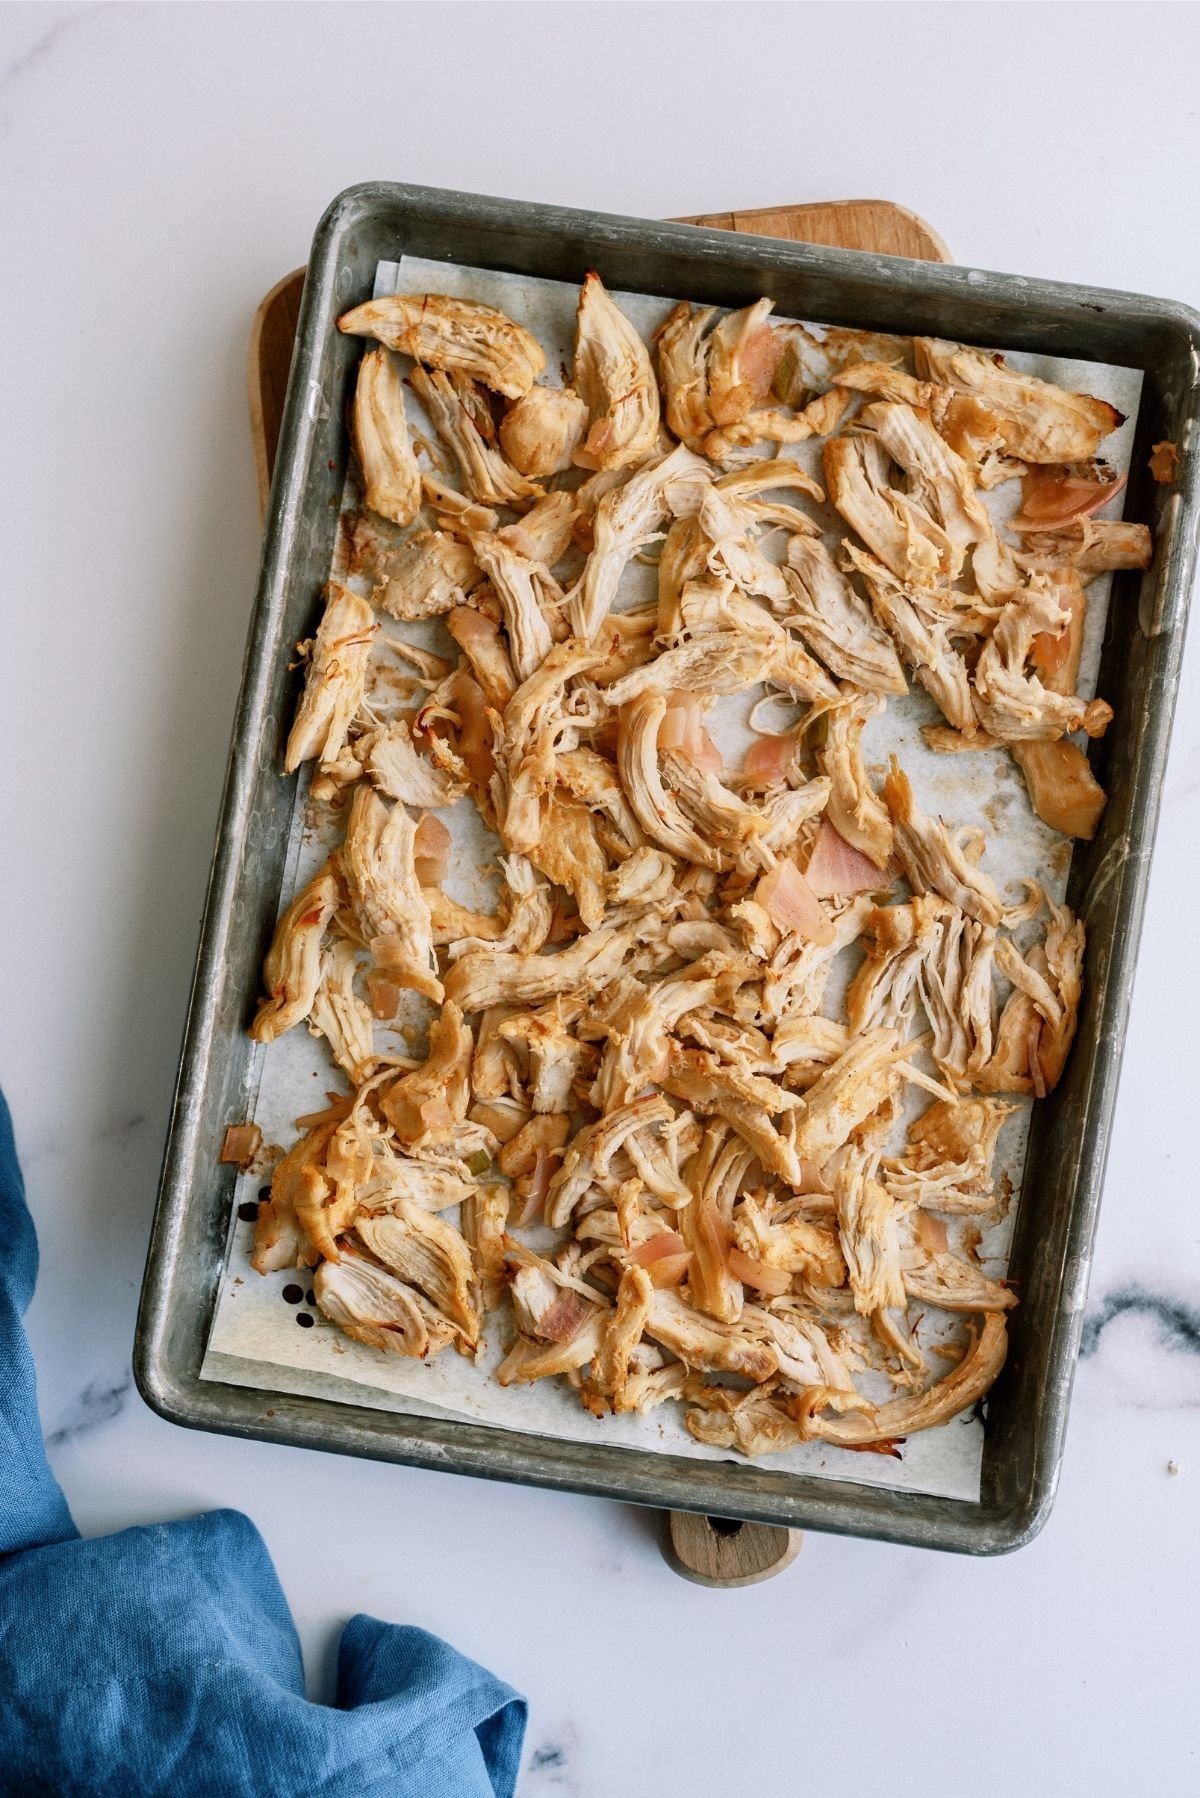 Shredded chicken spread out on a baking sheet